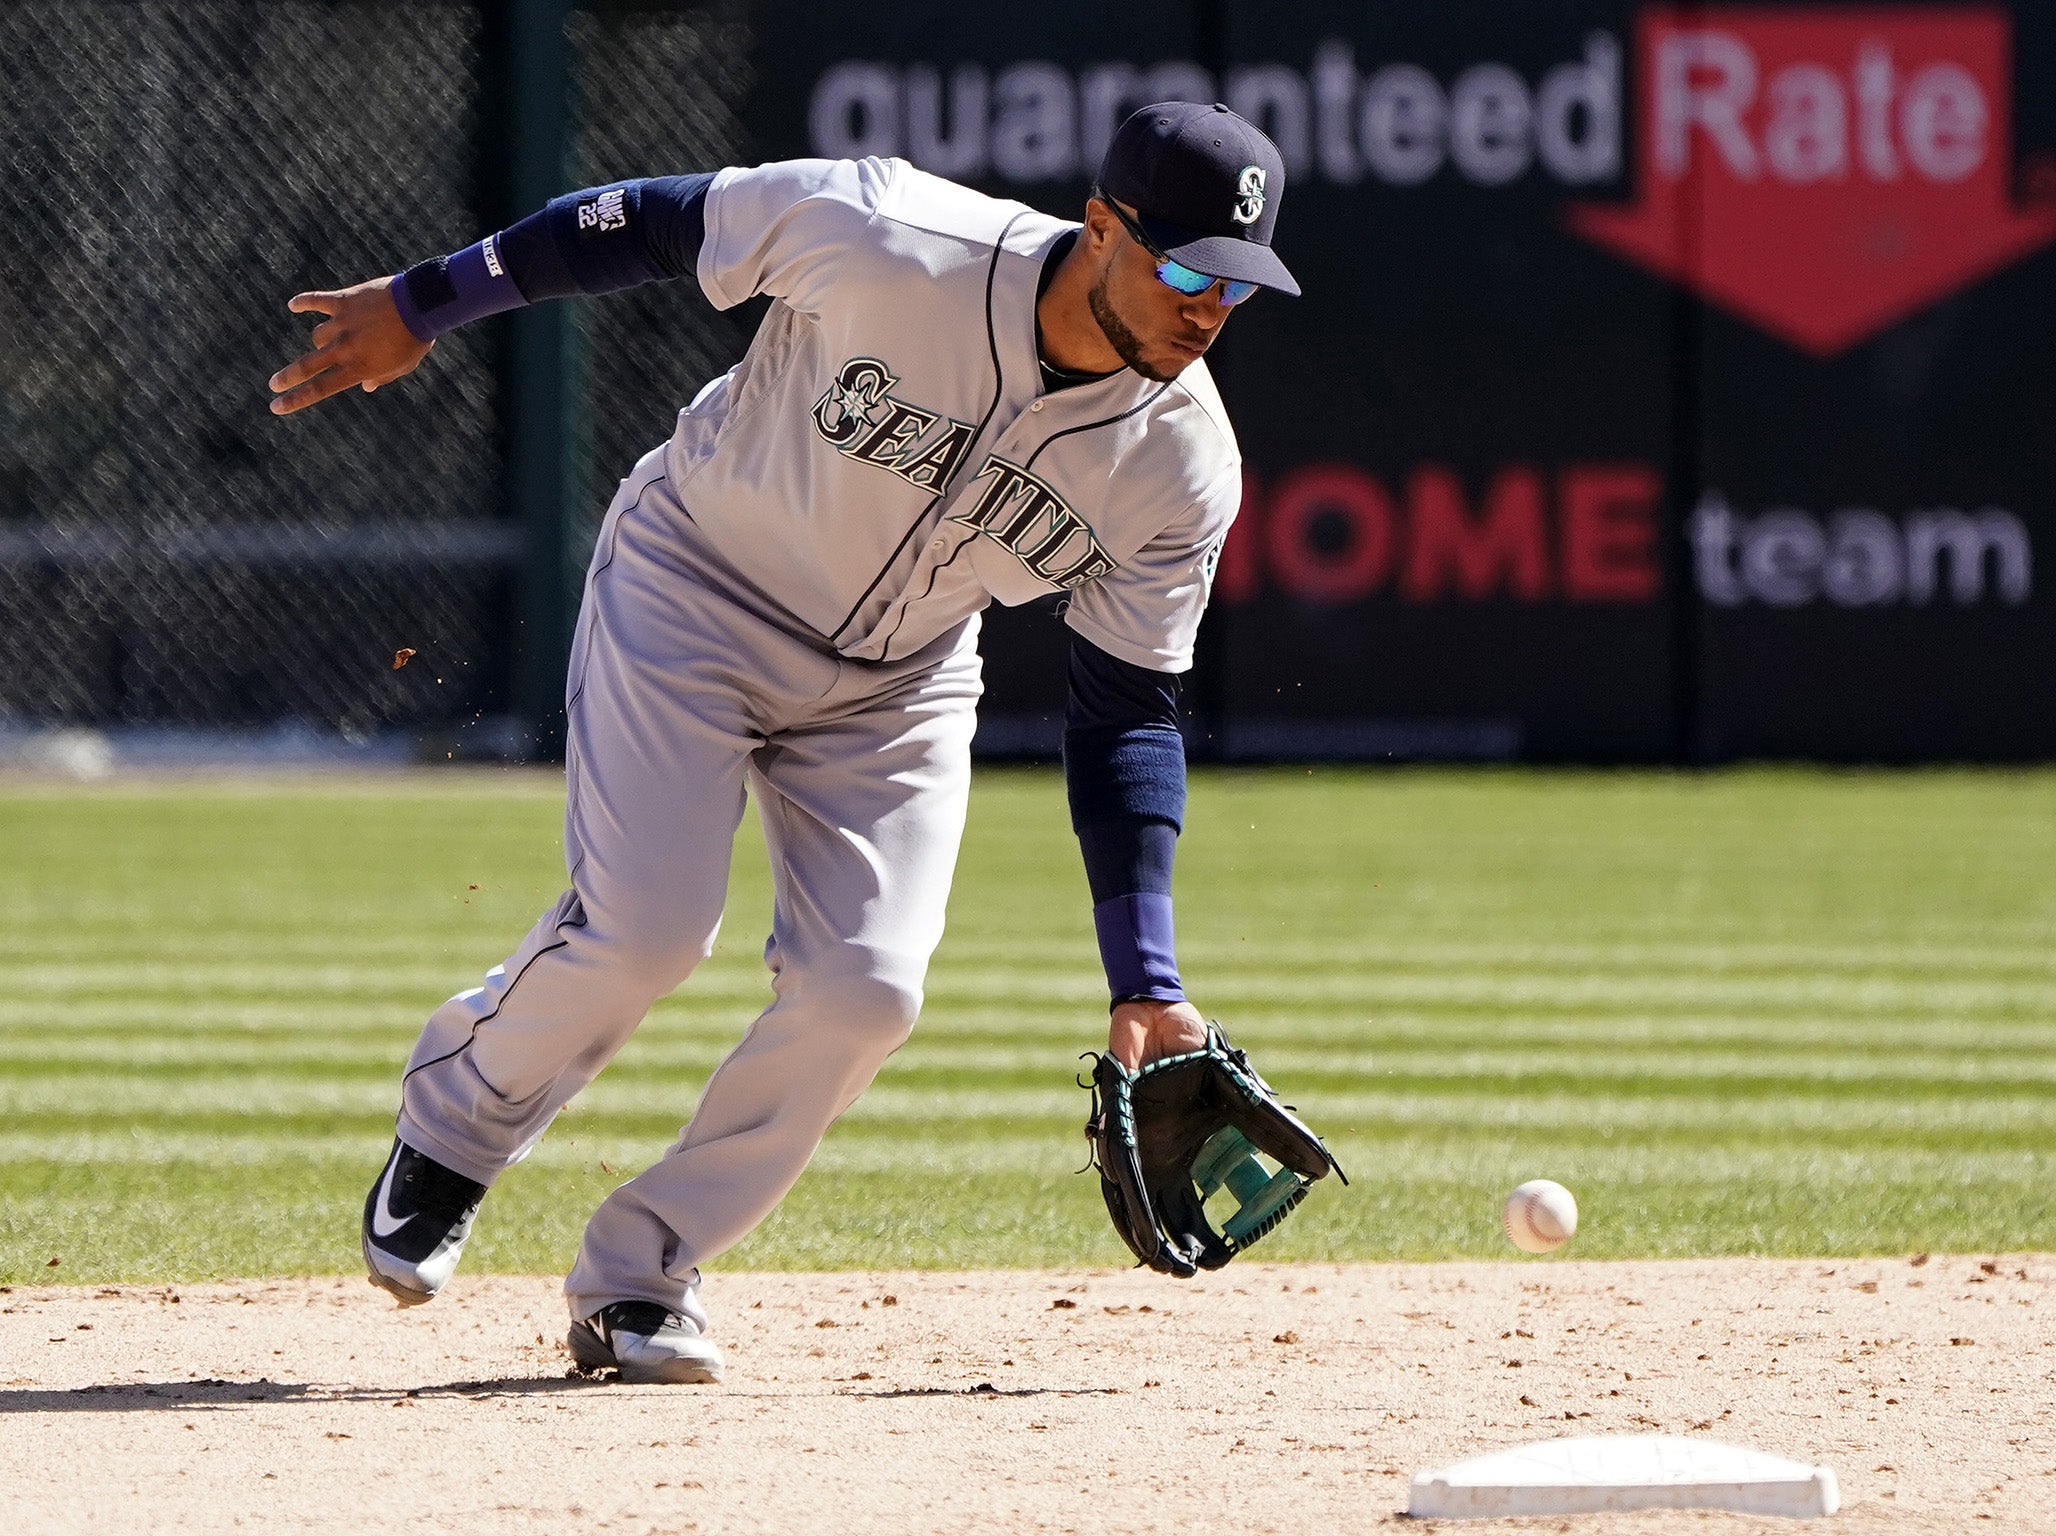 Robinson Cano suspended 80 games after testing positive for a banned  substance